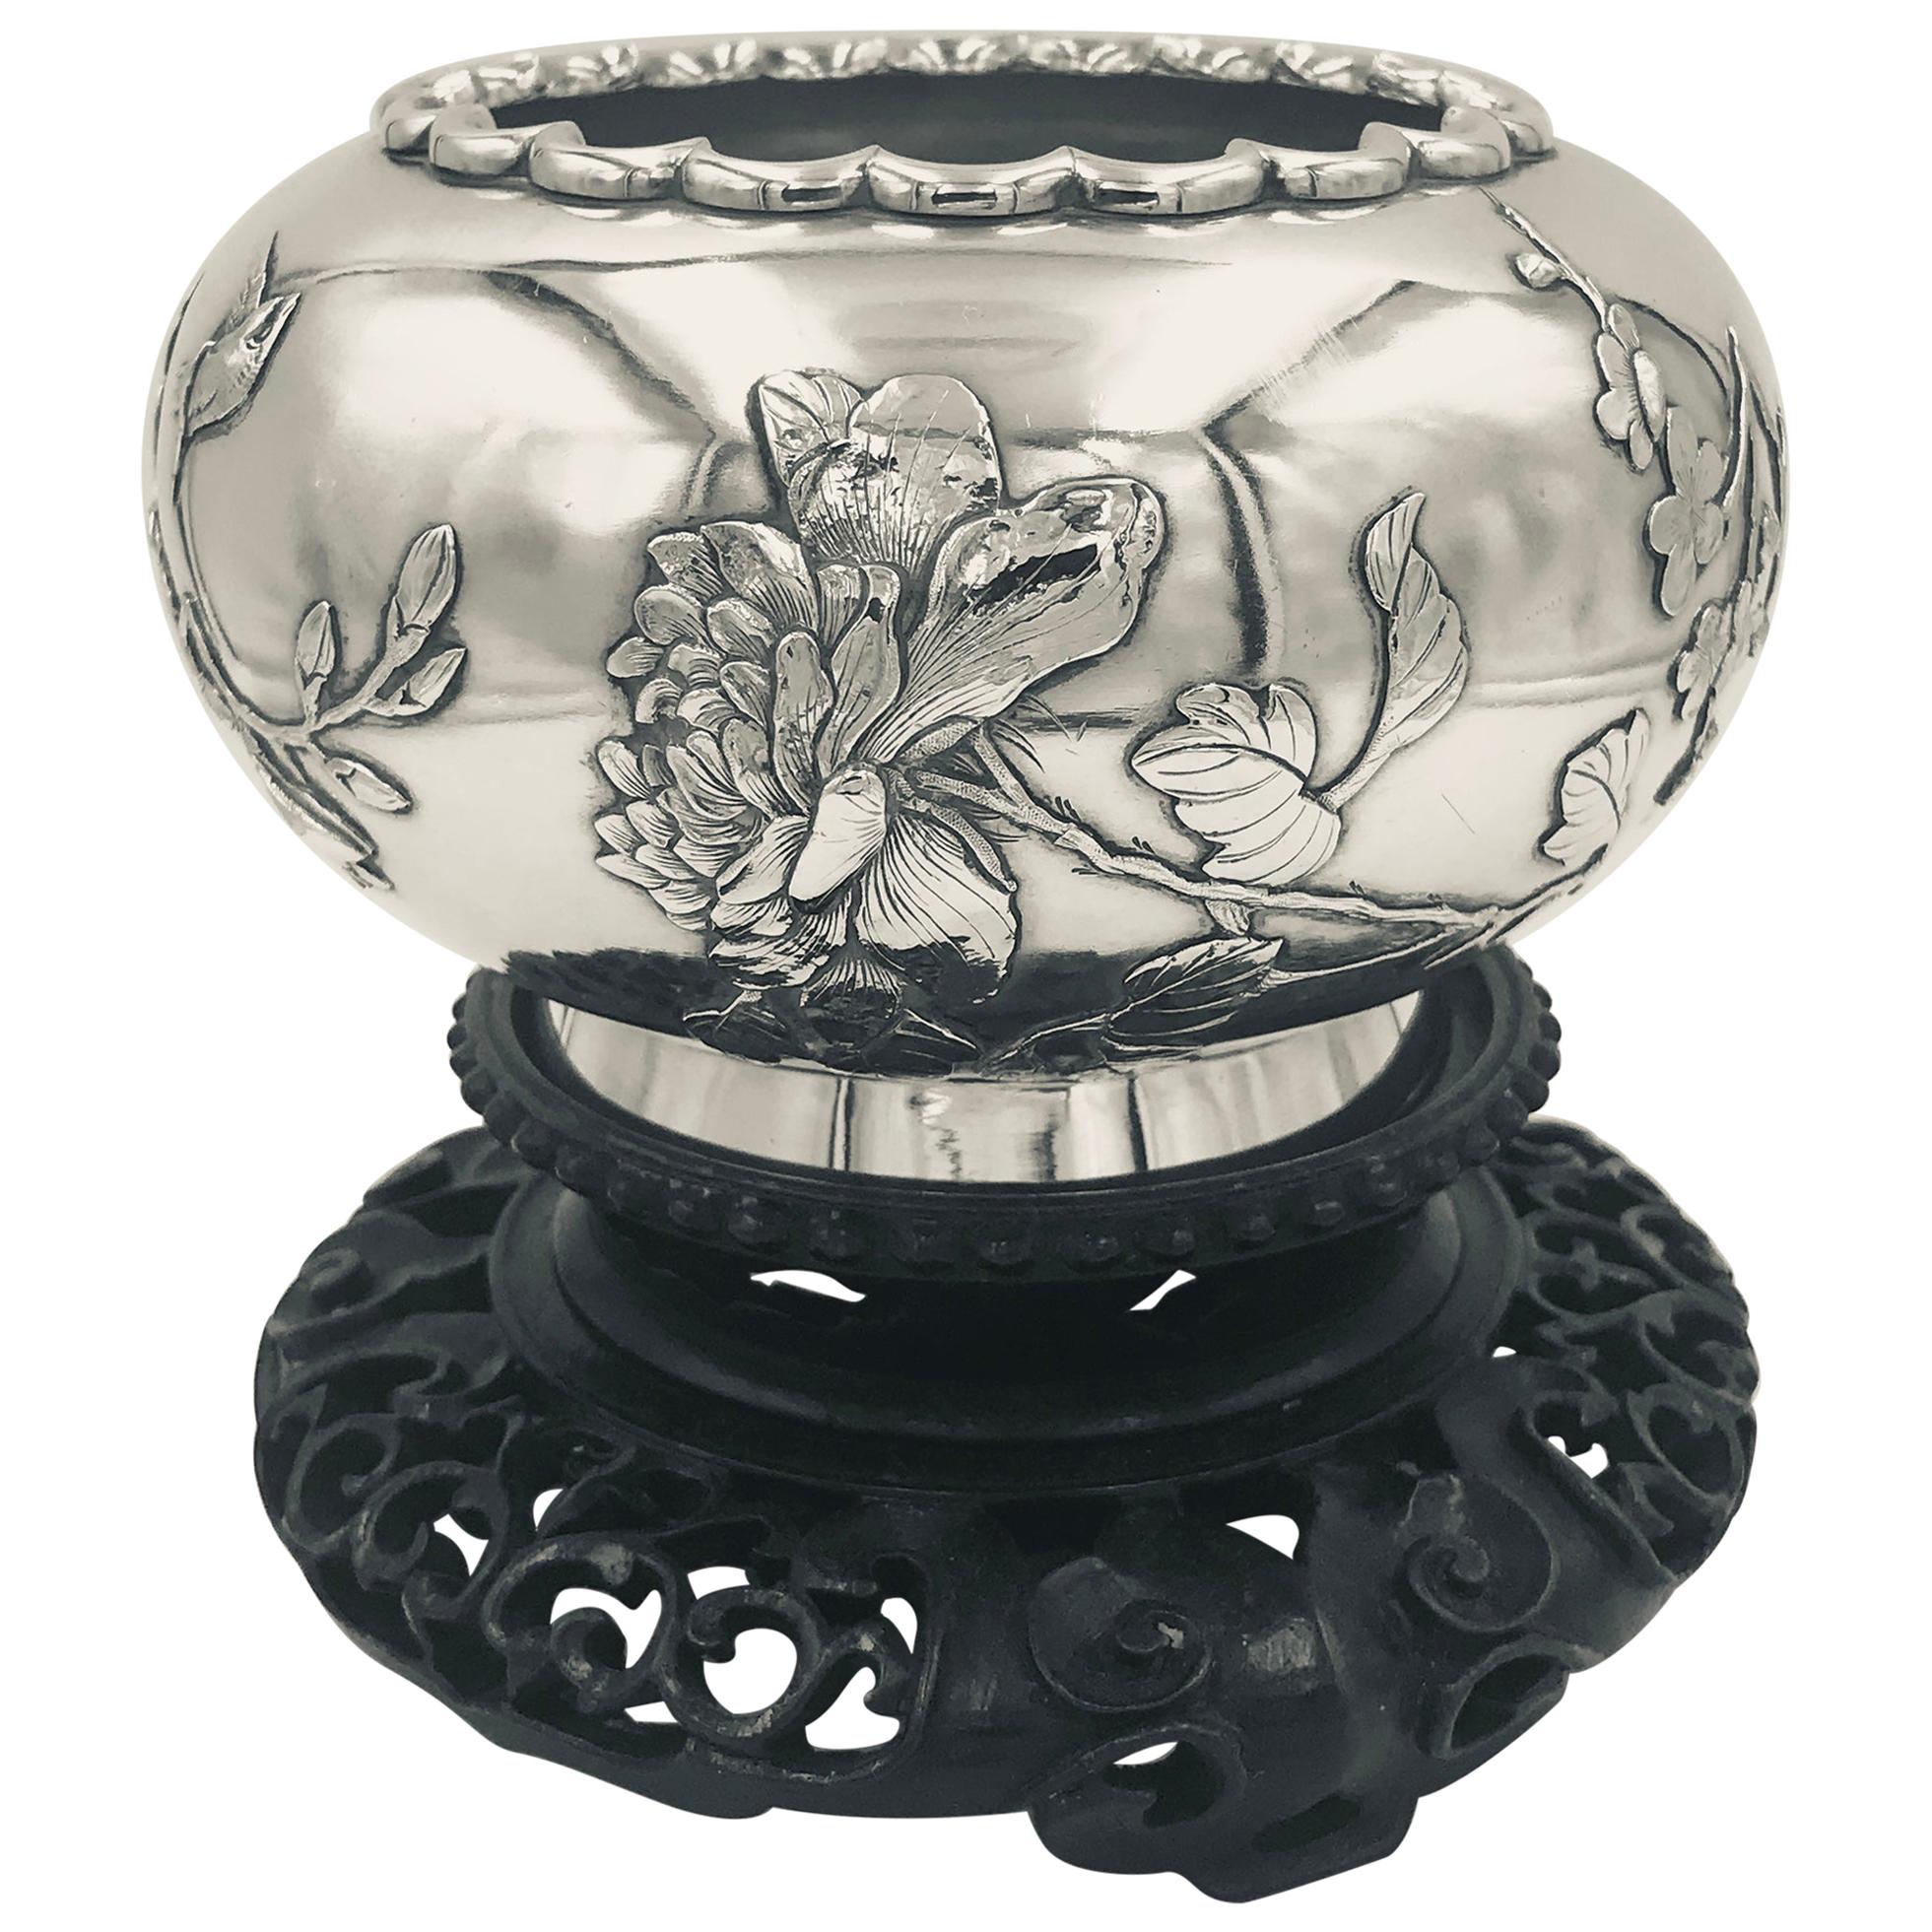 Chinese Silver Export Silver Bowl